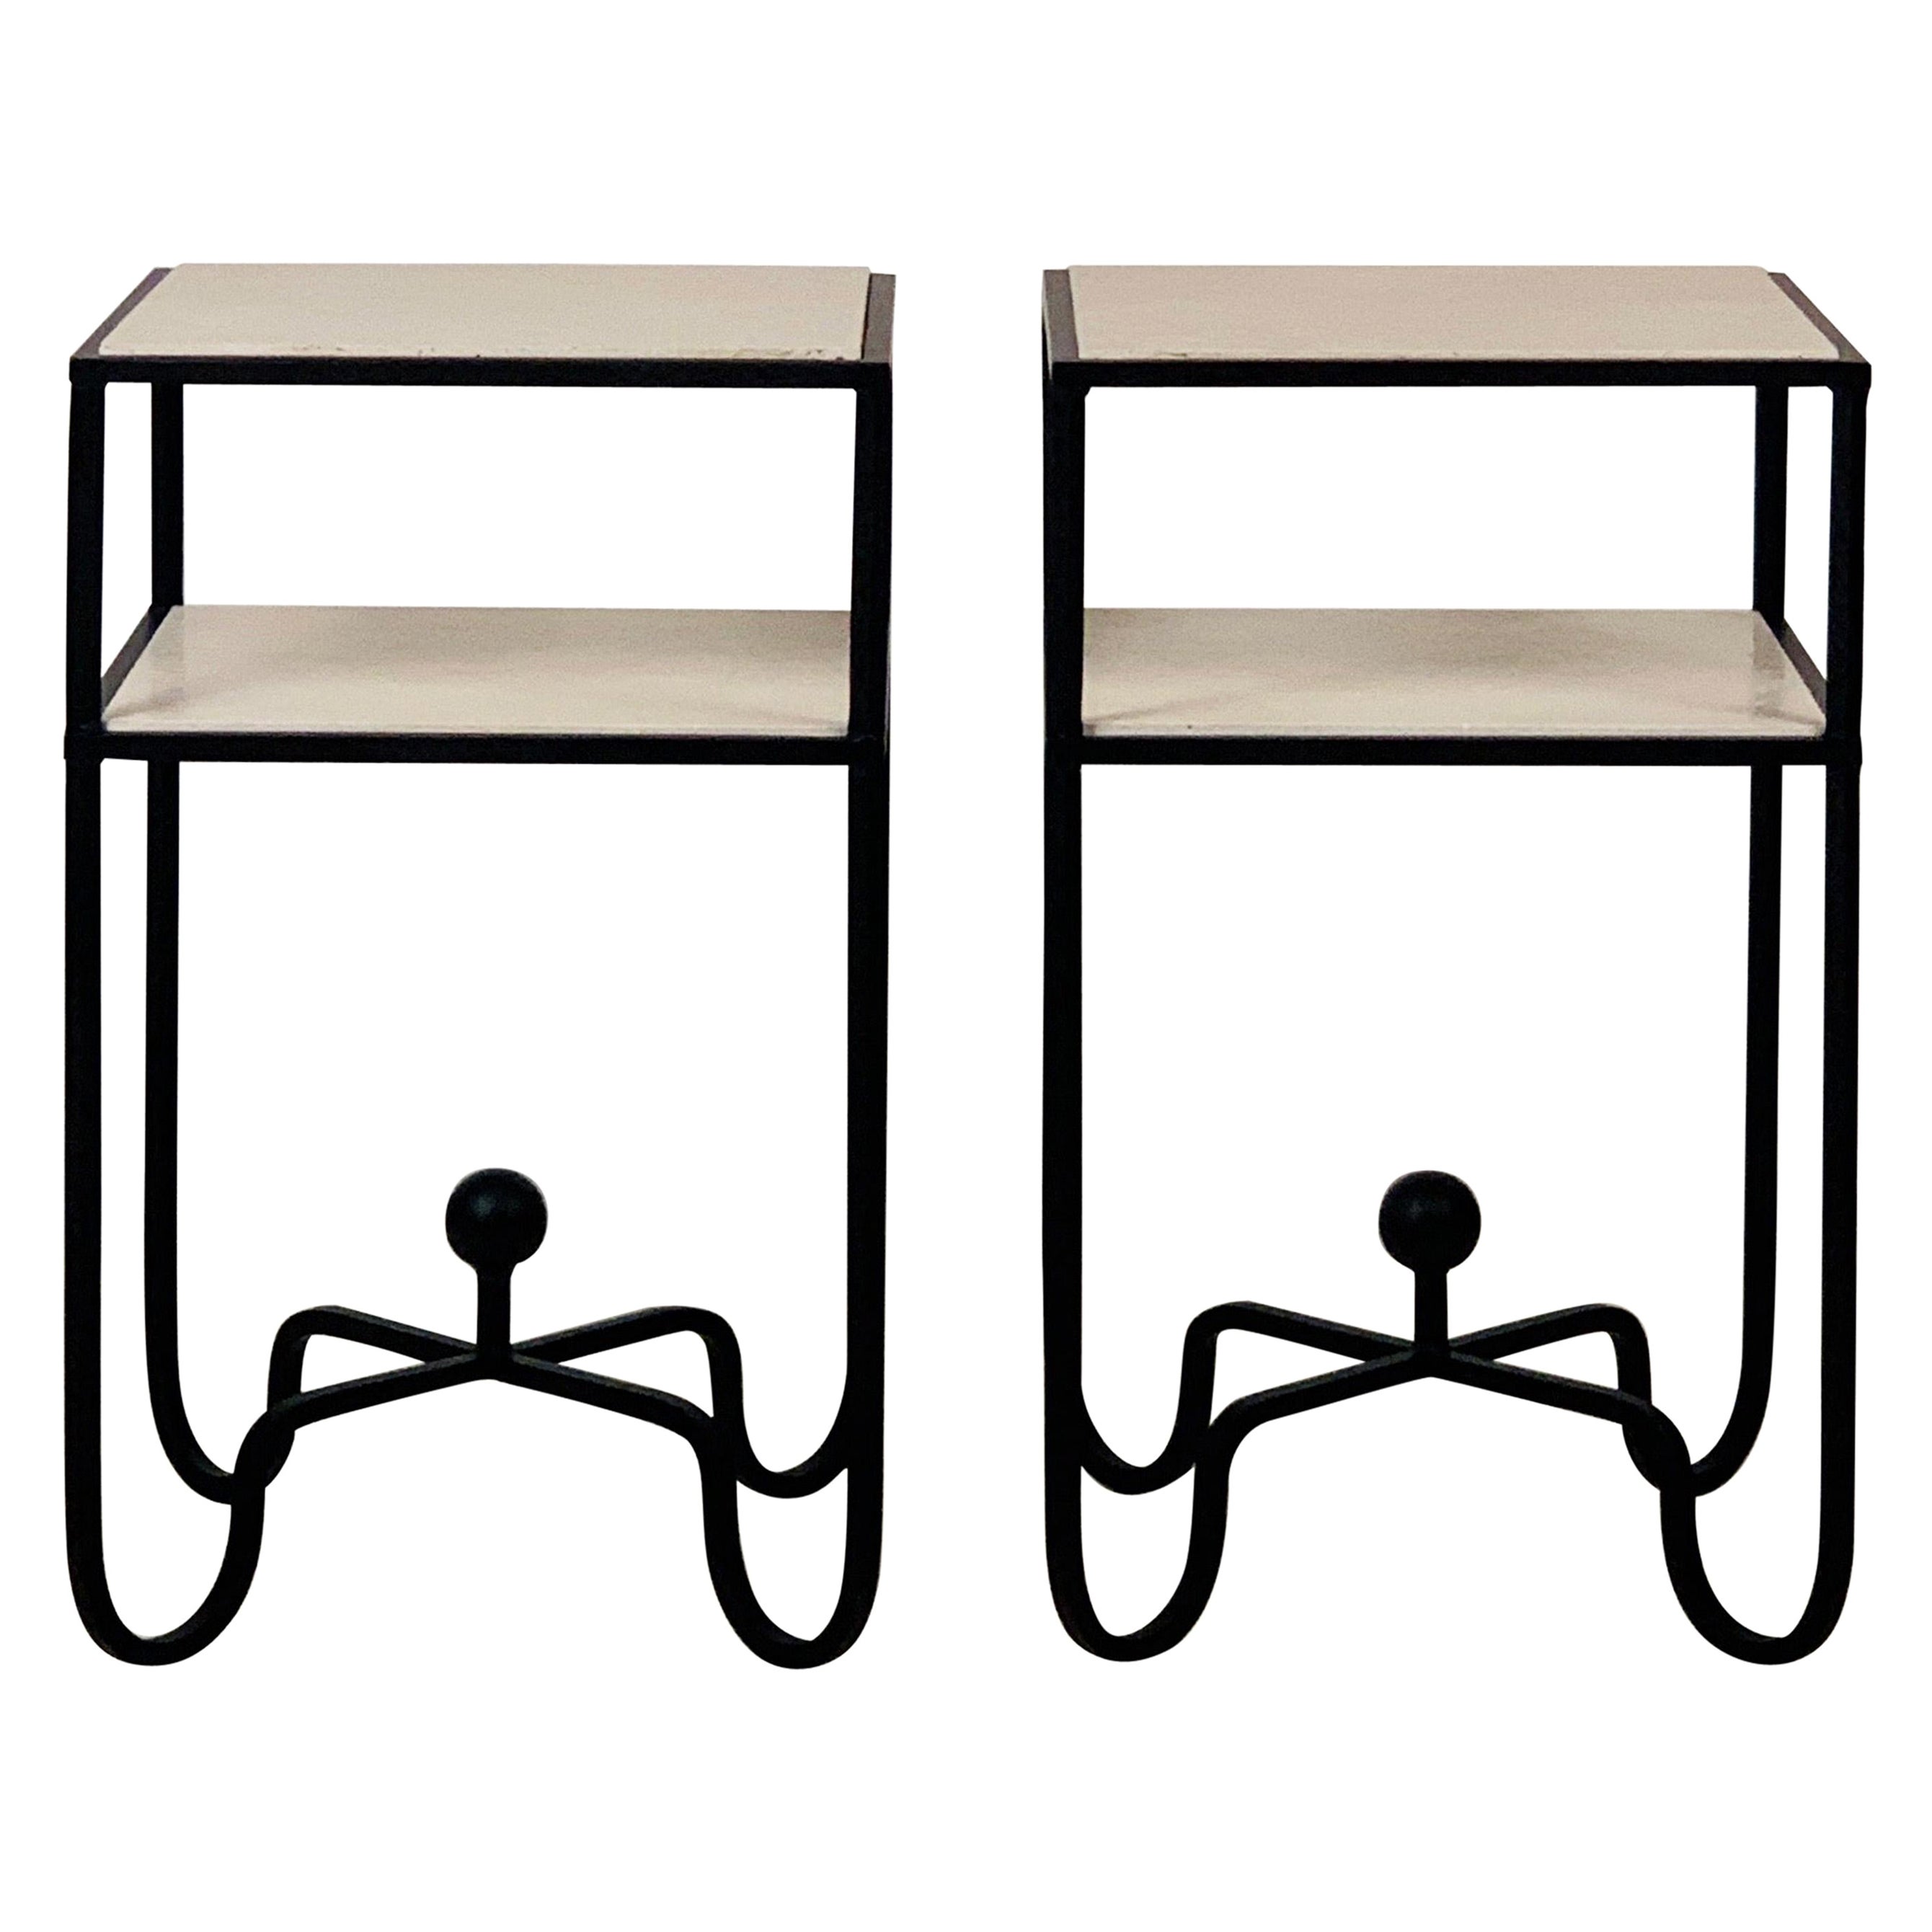 In-Stock Pair of 2-Tier Entretoise Side Tables by Design Frères For Sale